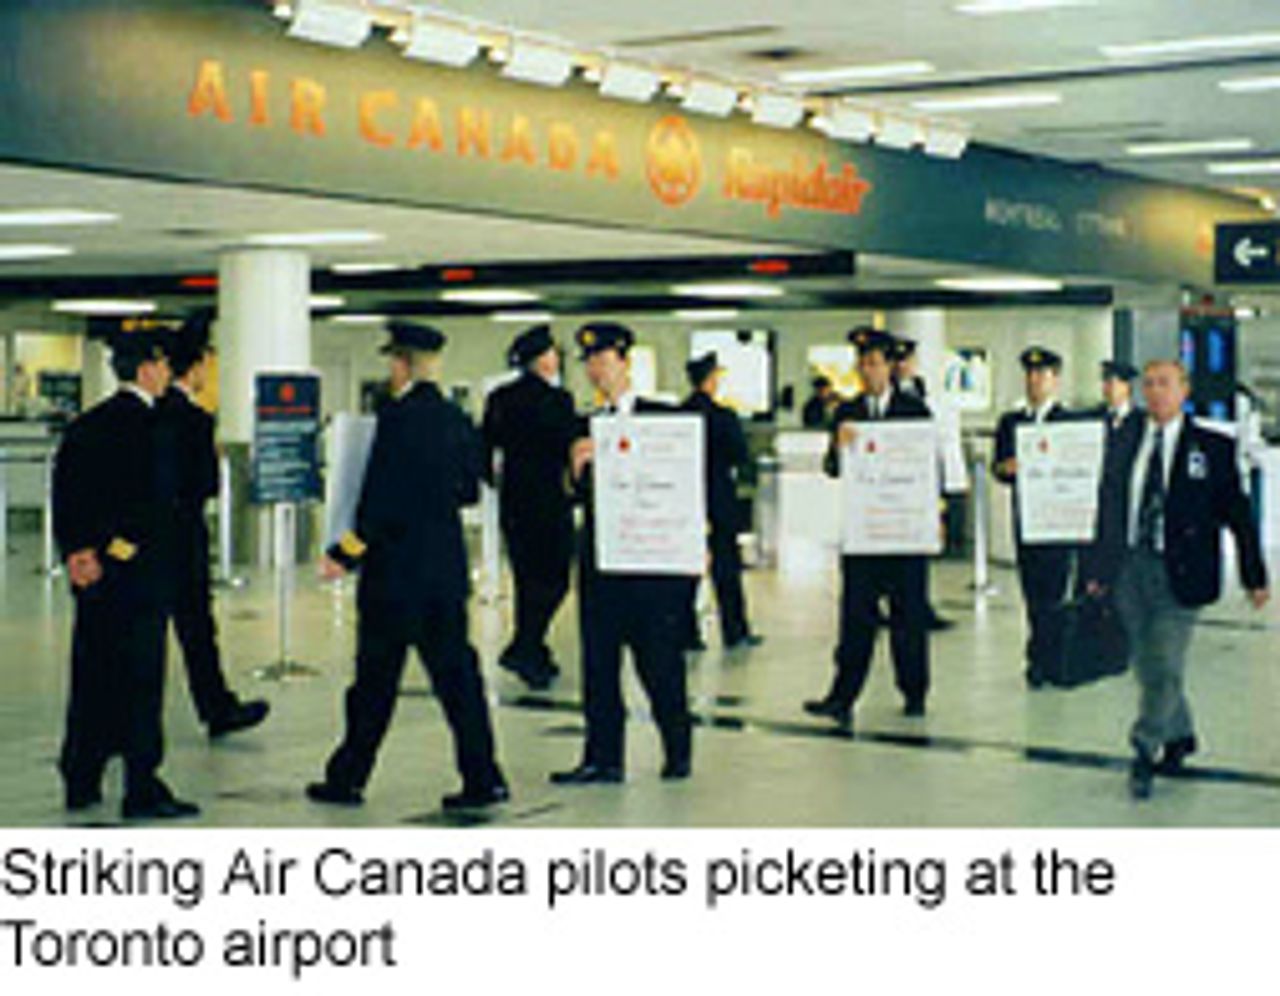 Settlement reported near in Air Canada strike World Socialist Web Site